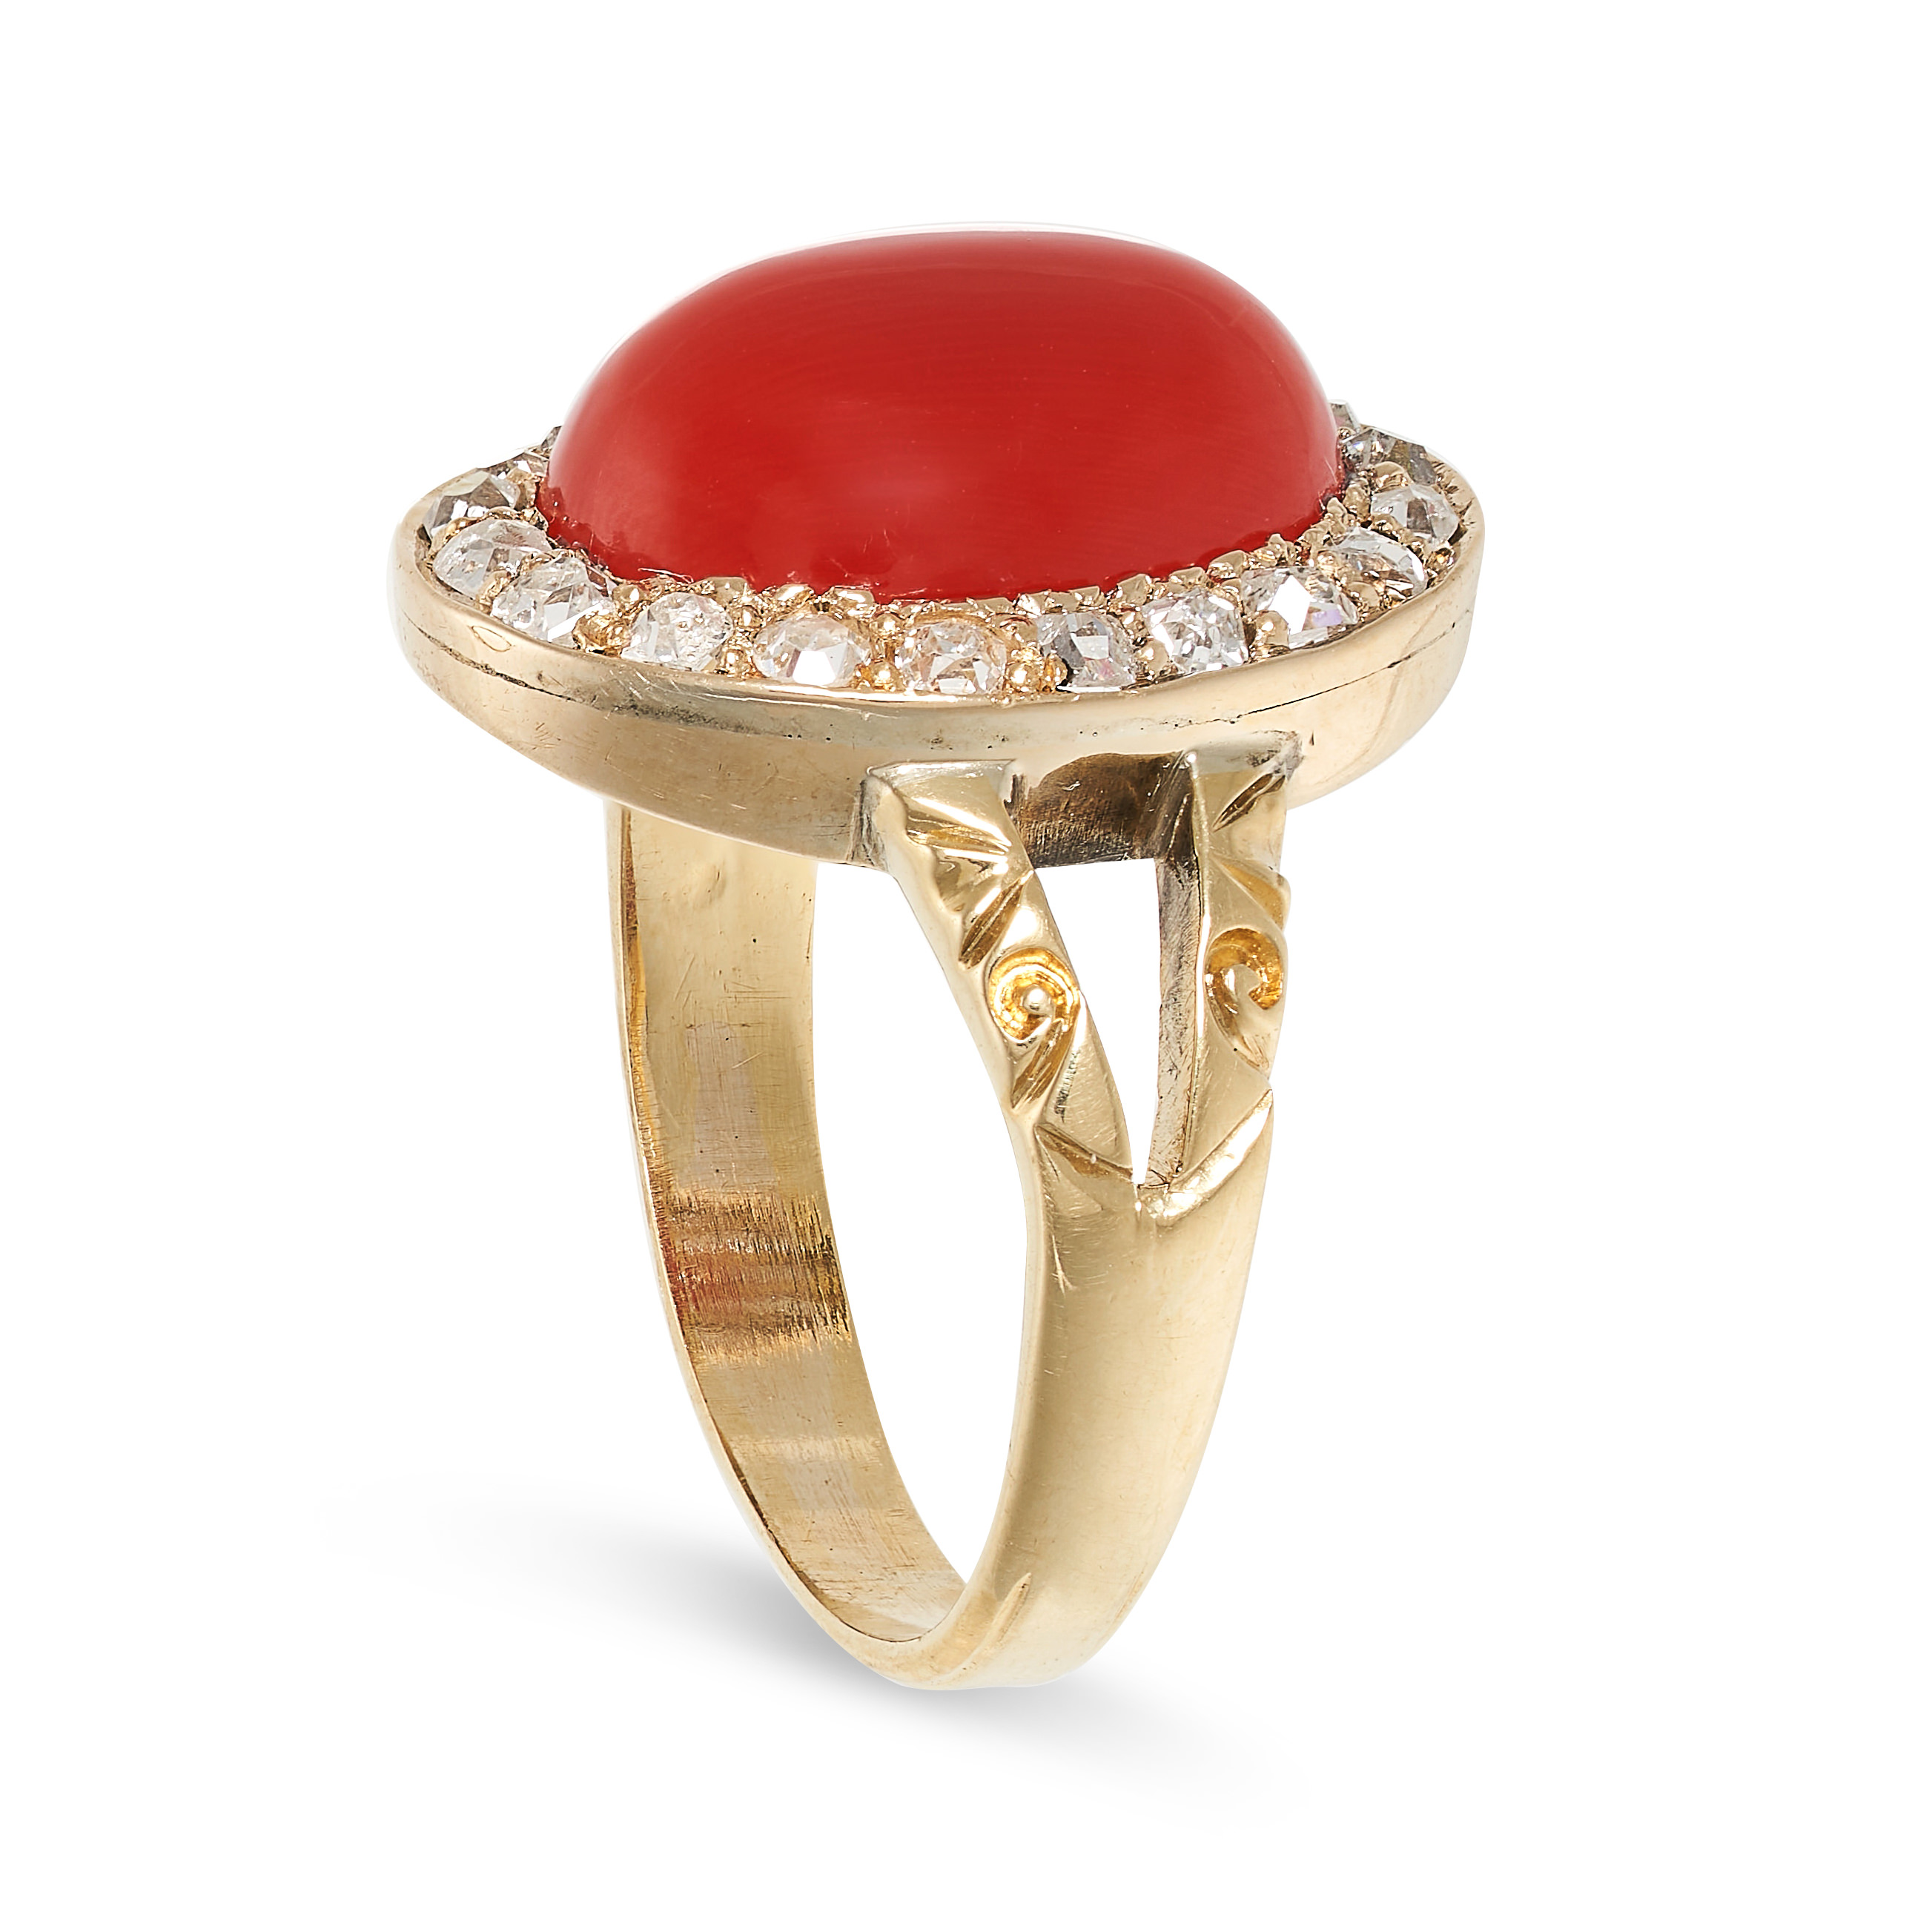 A DIAMOND AND CORAL RING in yellow gold, set with a polished oval piece of coral in a border of - Image 2 of 2